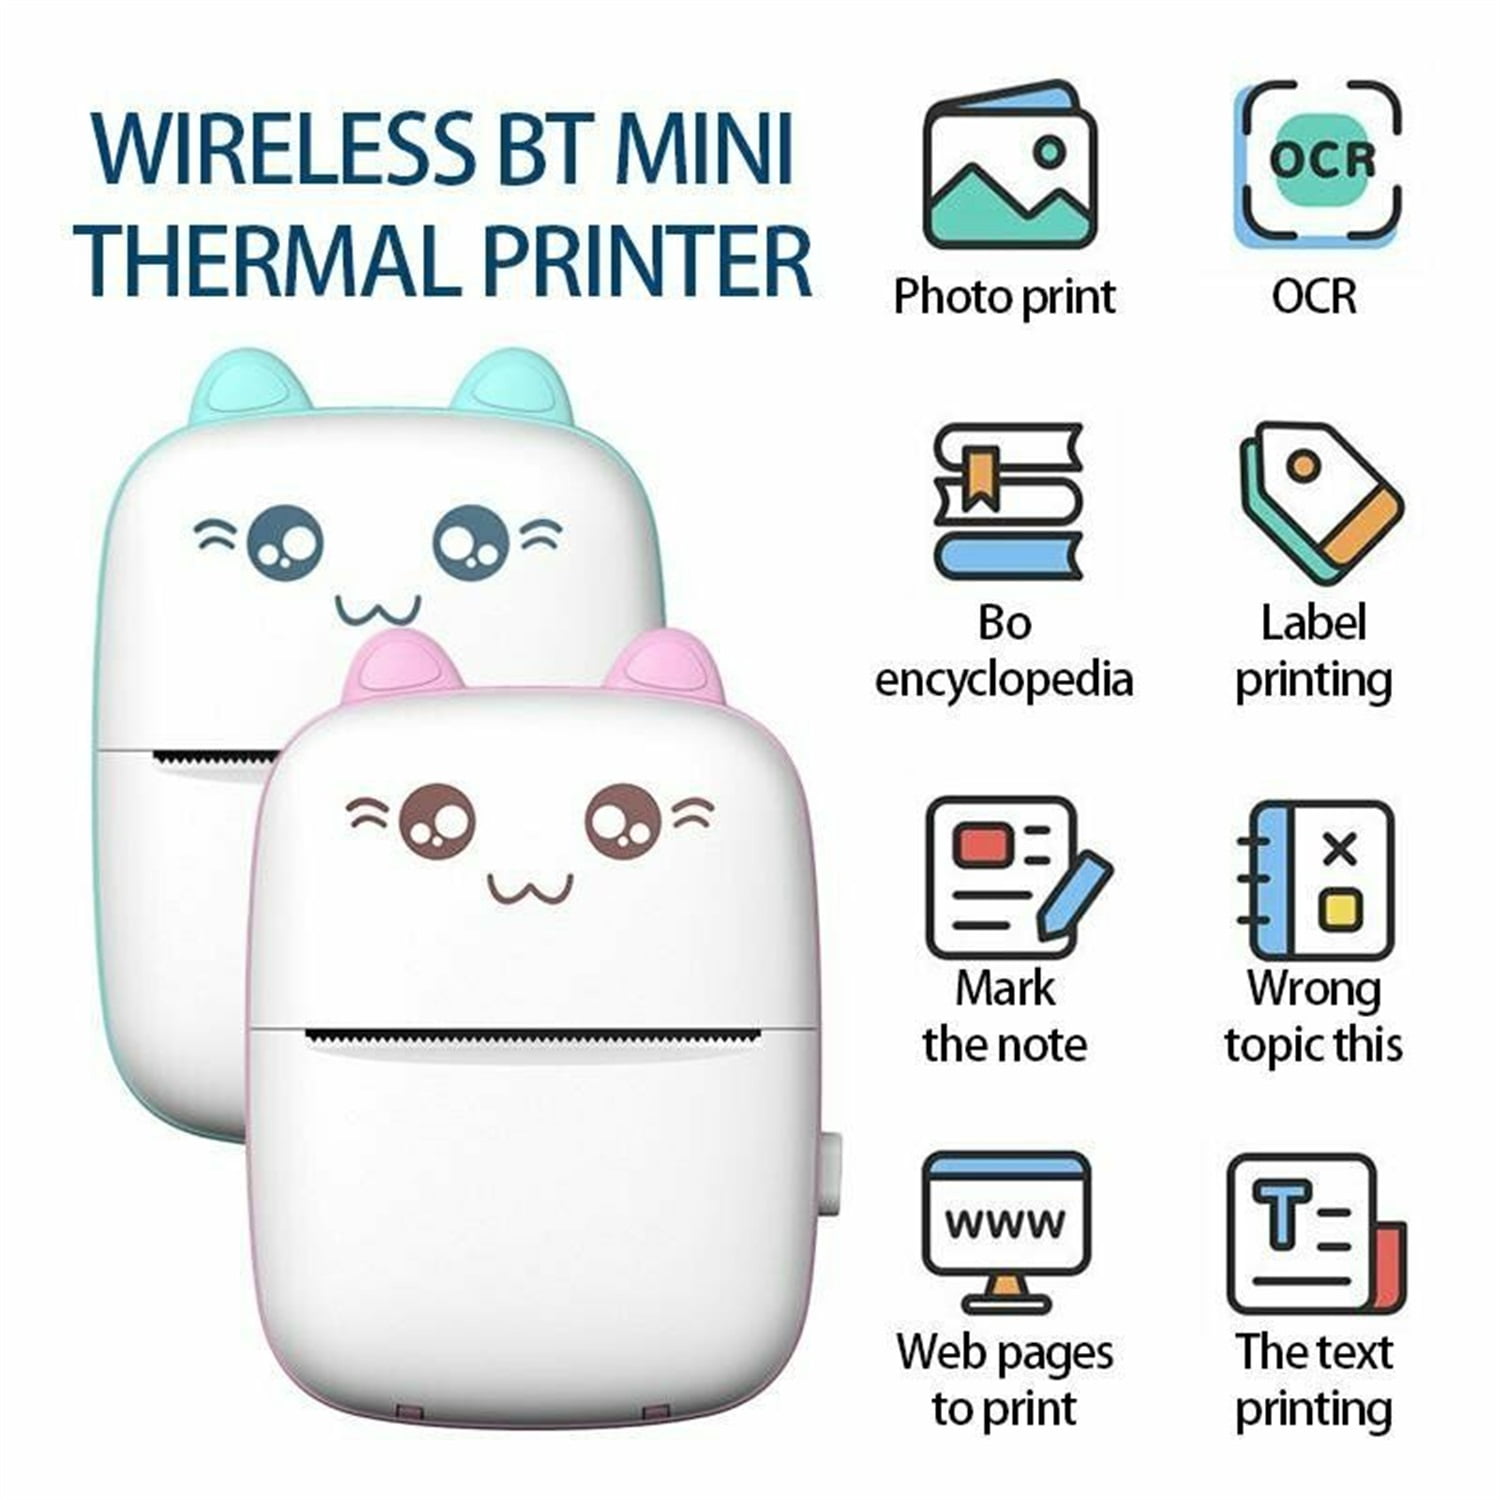 Compatible with iOS and Android Devices Note Receipt Print White USB Powered 57mm Bluetooth Pocket Mobile Photo Printer Mini Wireless Photo Printer